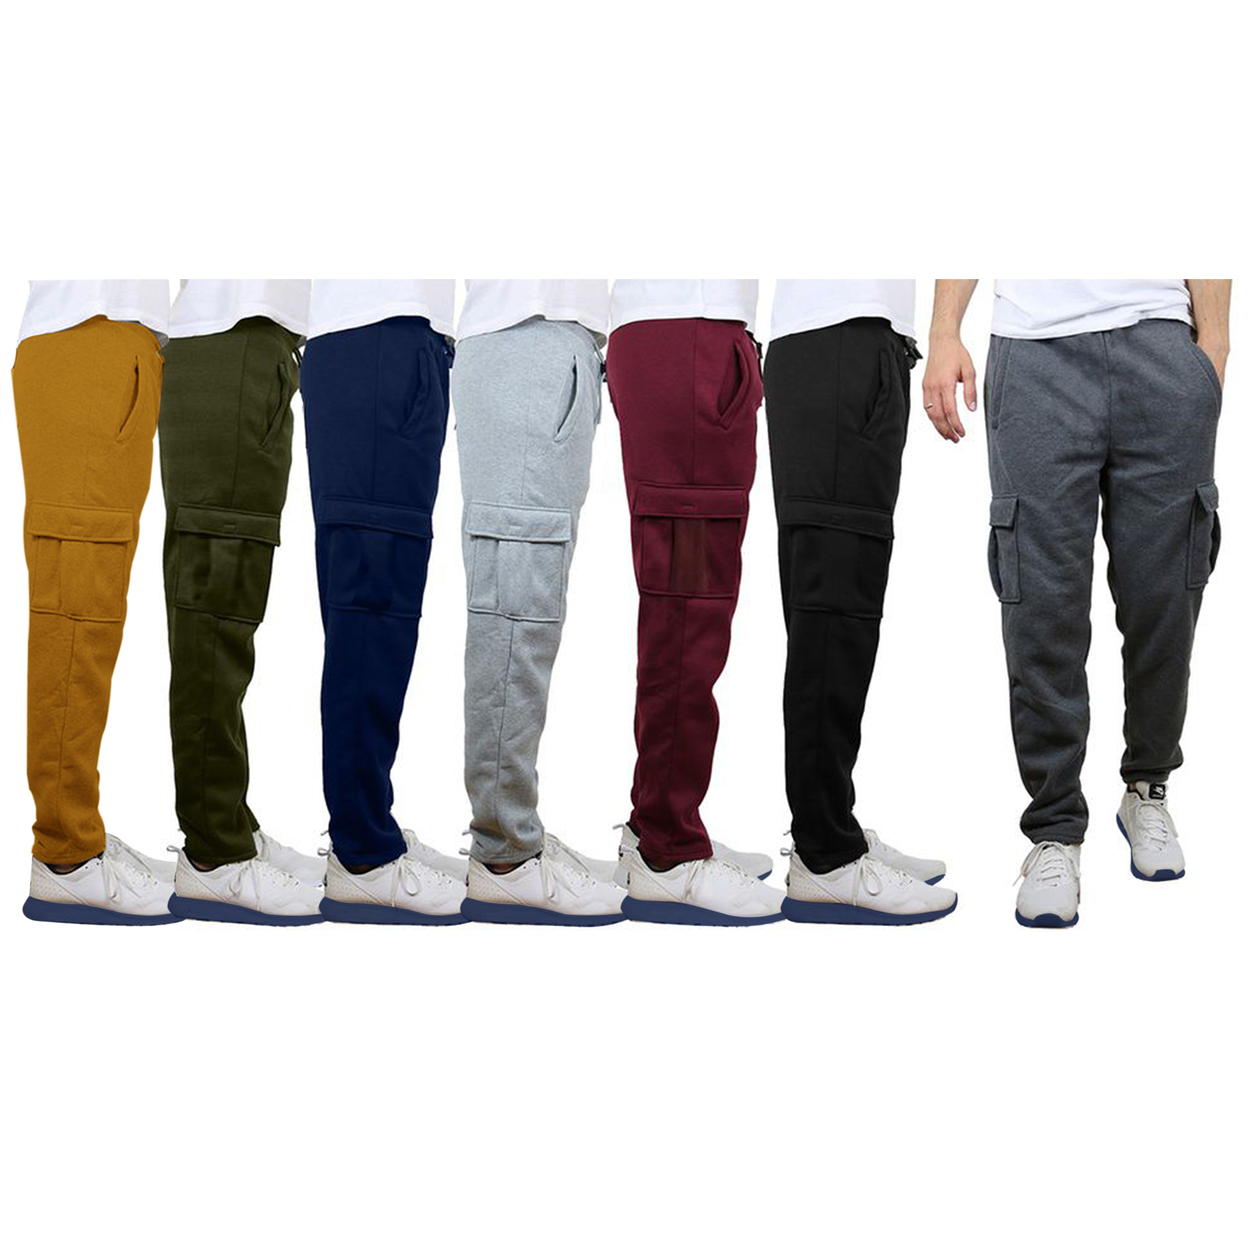 Multipack Men's Casual Solid Cargo Jogger Sweatpants With Pockets - 3, Xl